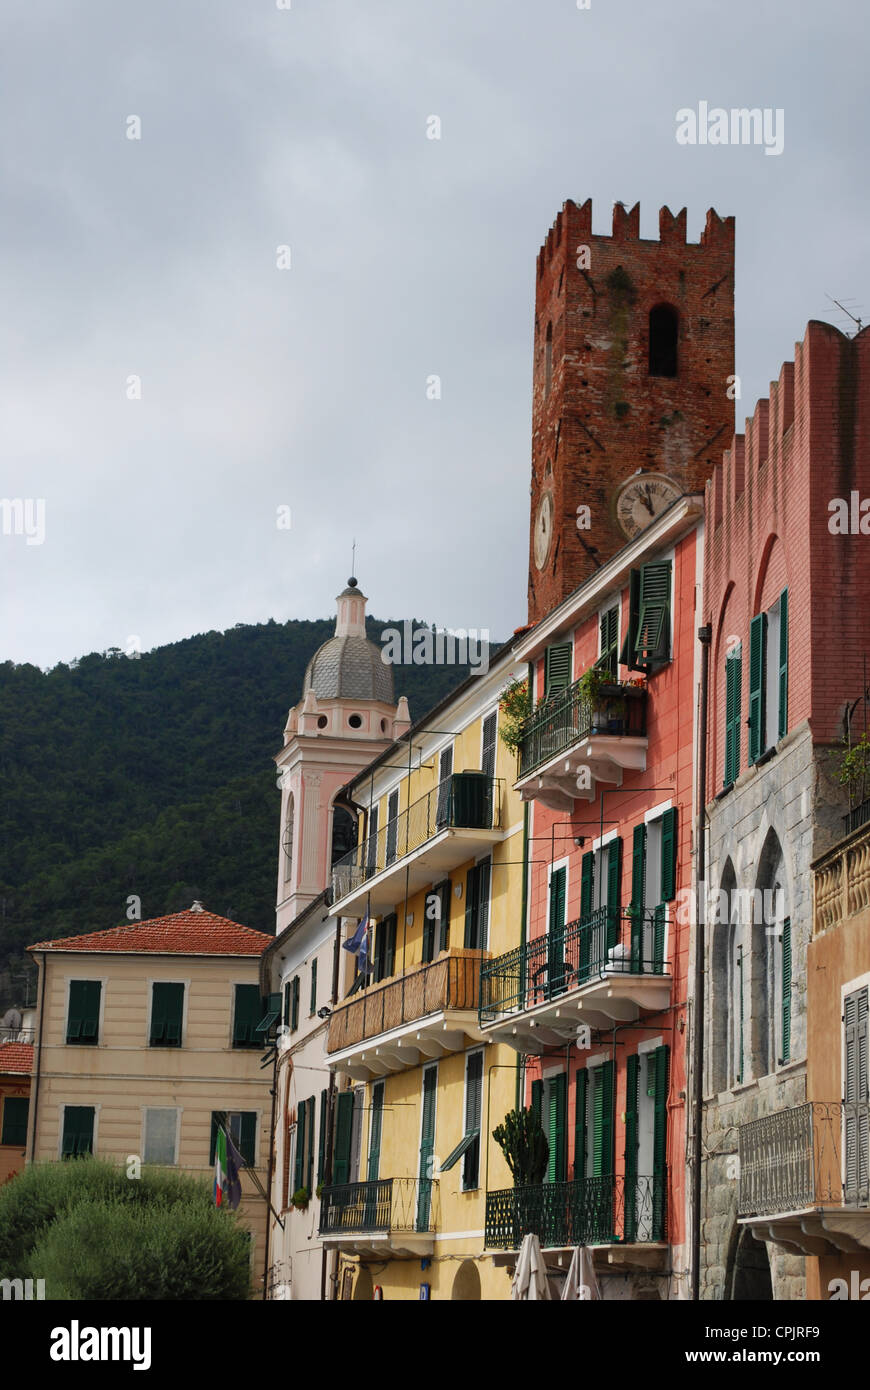 Colorful houses and medieval tower, Noli village, Liguria, Italy Stock Photo